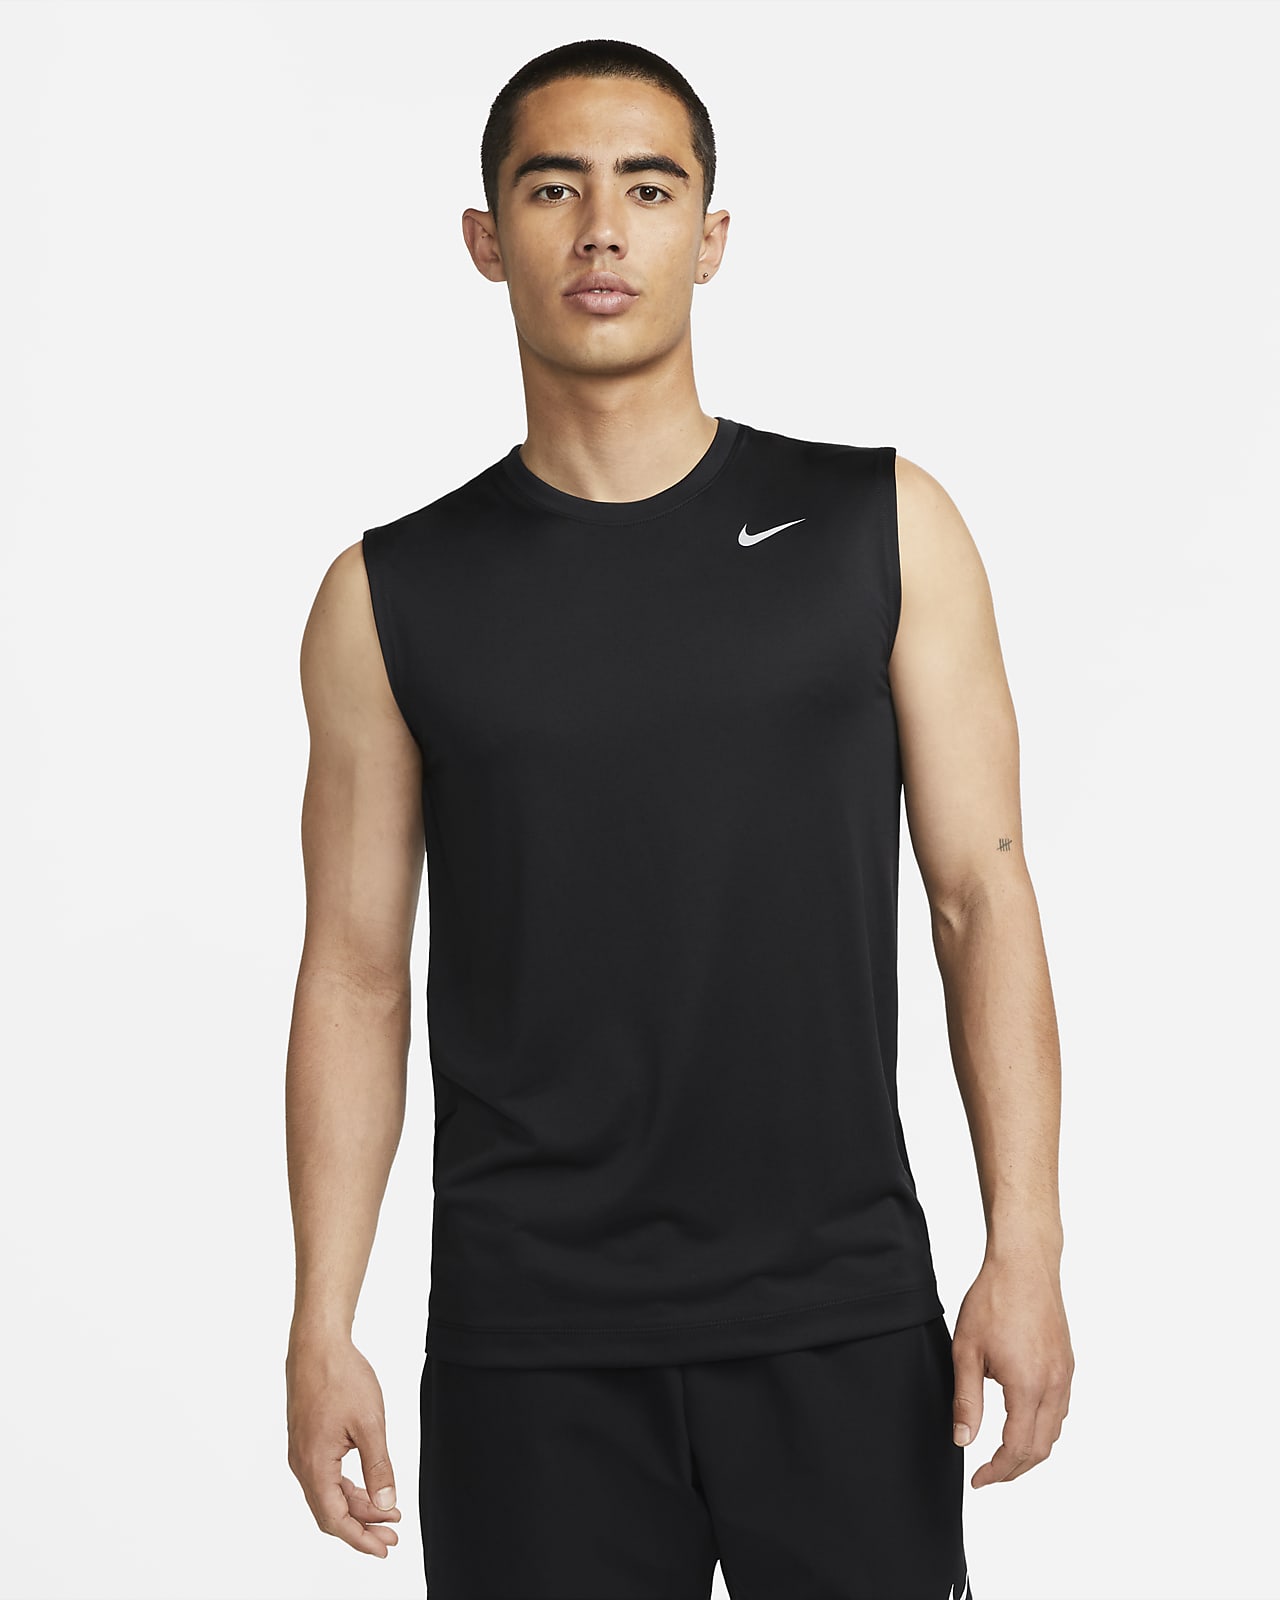 Men's Athletic & Workout Clothes. Nike IN